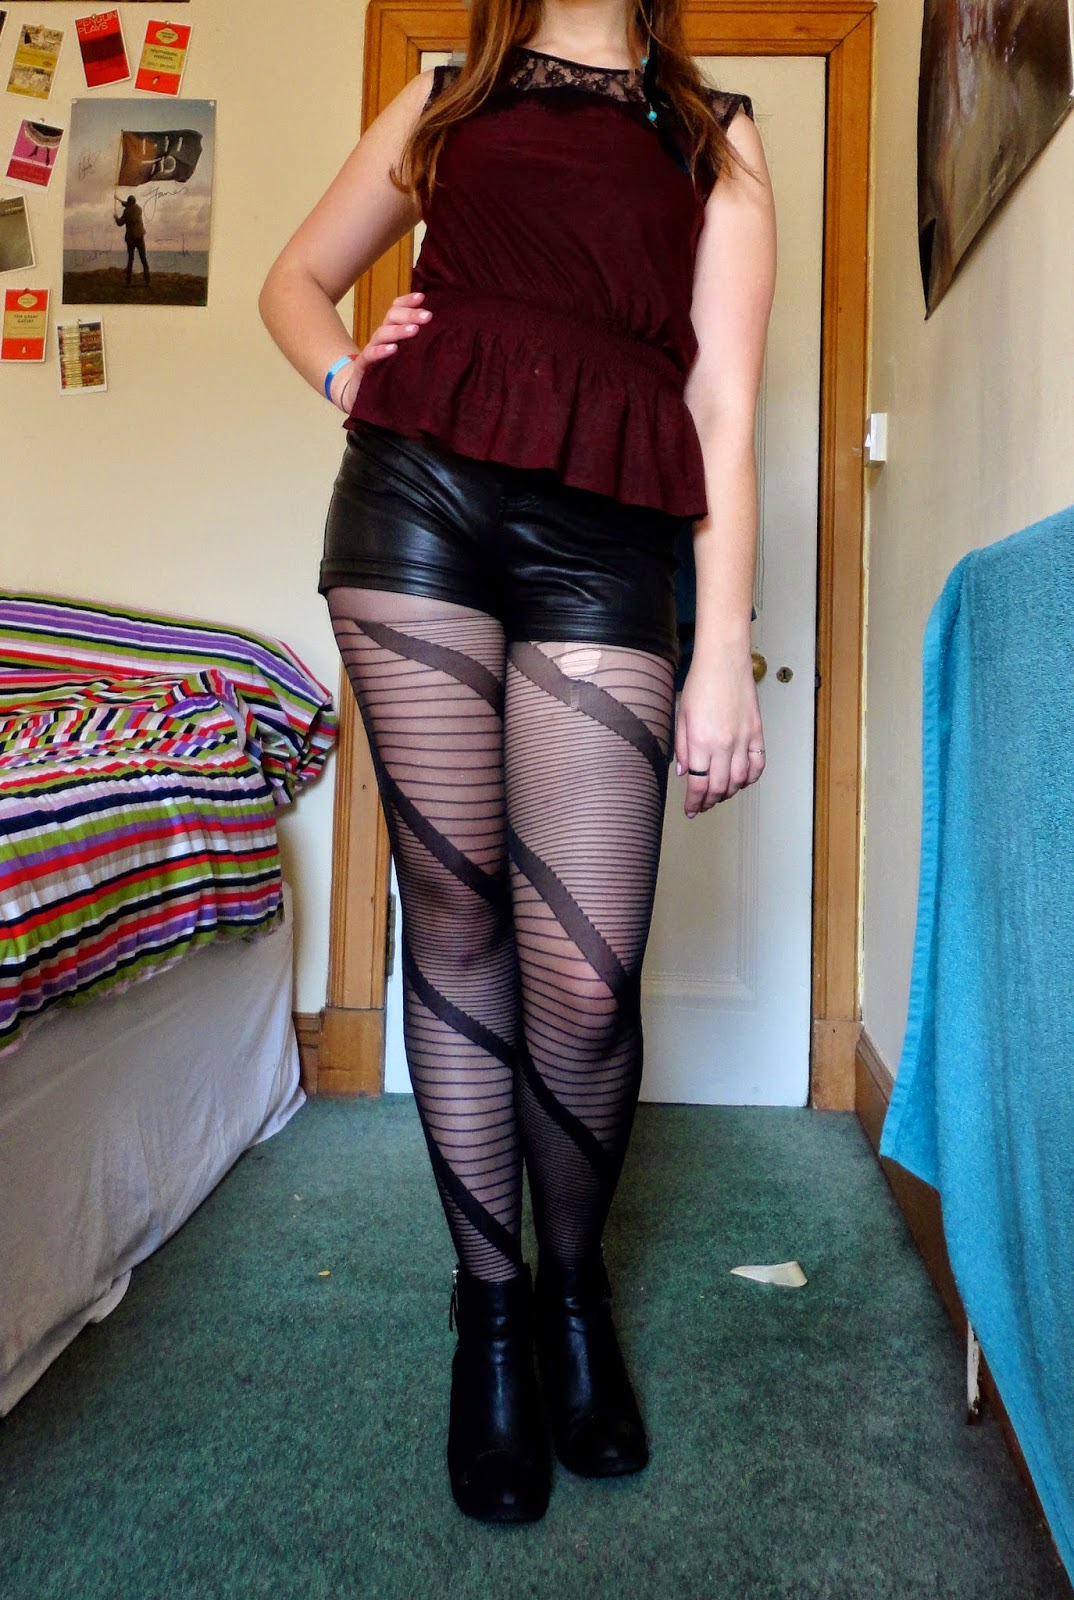 outfit of red peplum top with black lace, black fake leather shorts, striped tights and heeled ankle boots